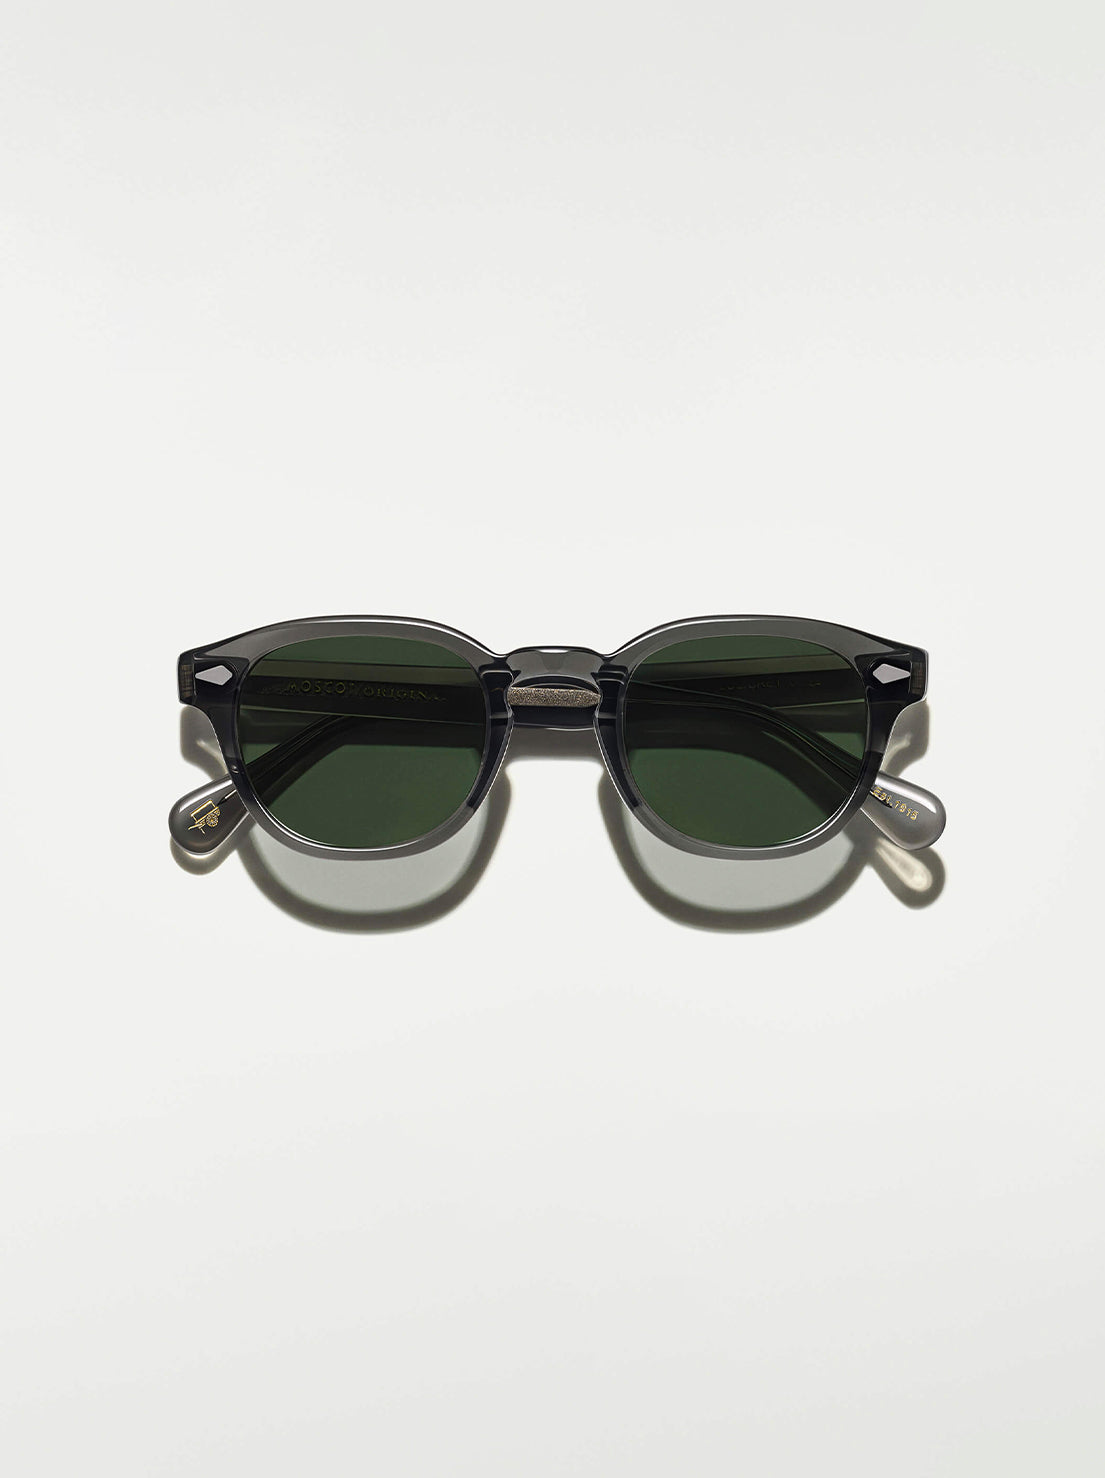 Moscot - Lemtosh Sunglasses in Grey 49 (Wide) - G15 Lens